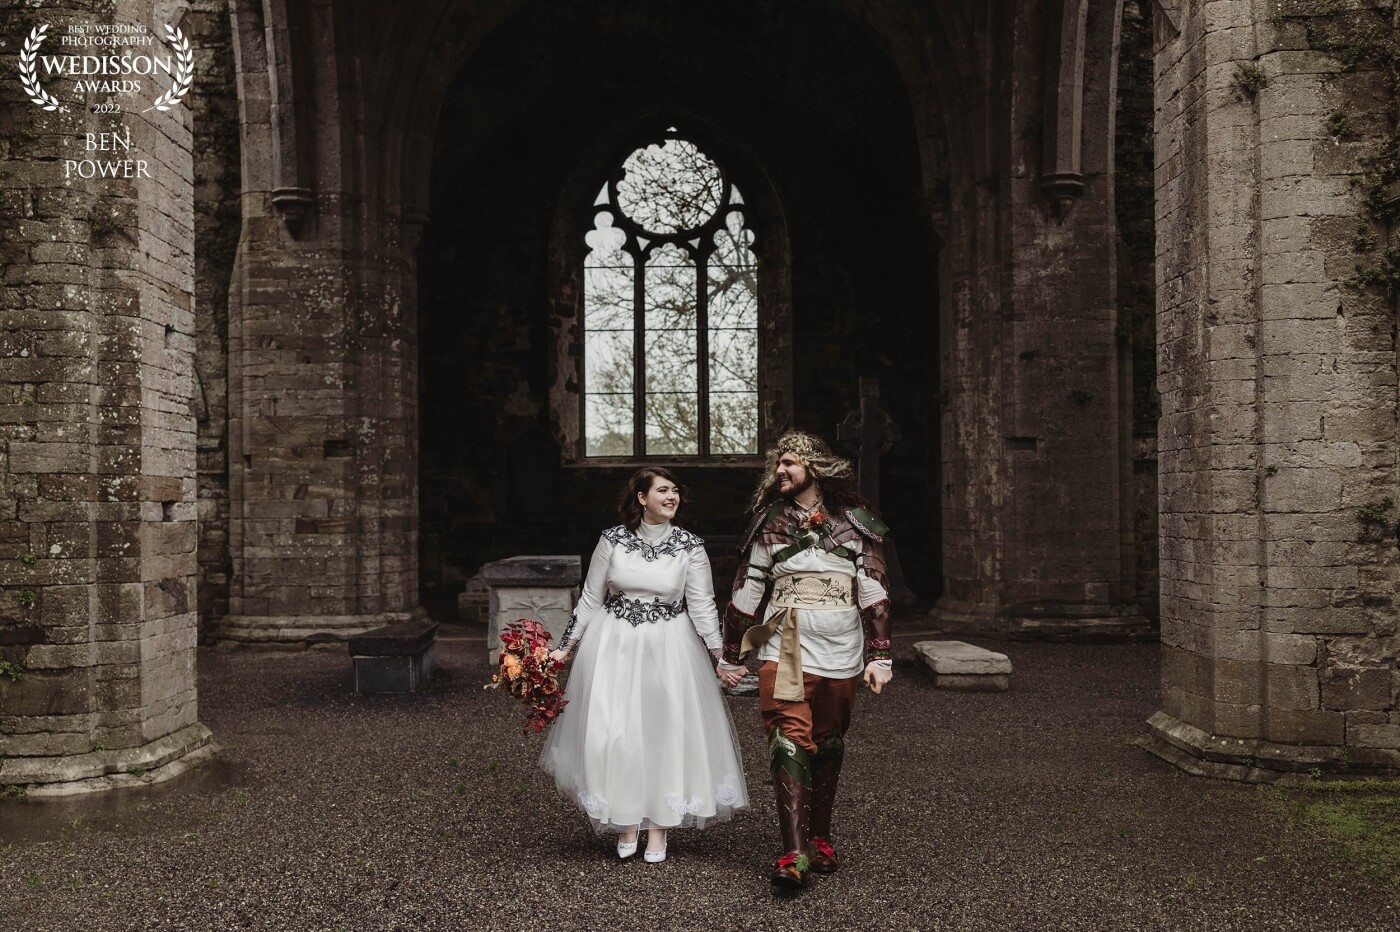 Arianna & Cillian went all out for their Wedding day, in keeping with their own unique interests & style. A historic Abbey was a fitting setting for their bridal portraits.